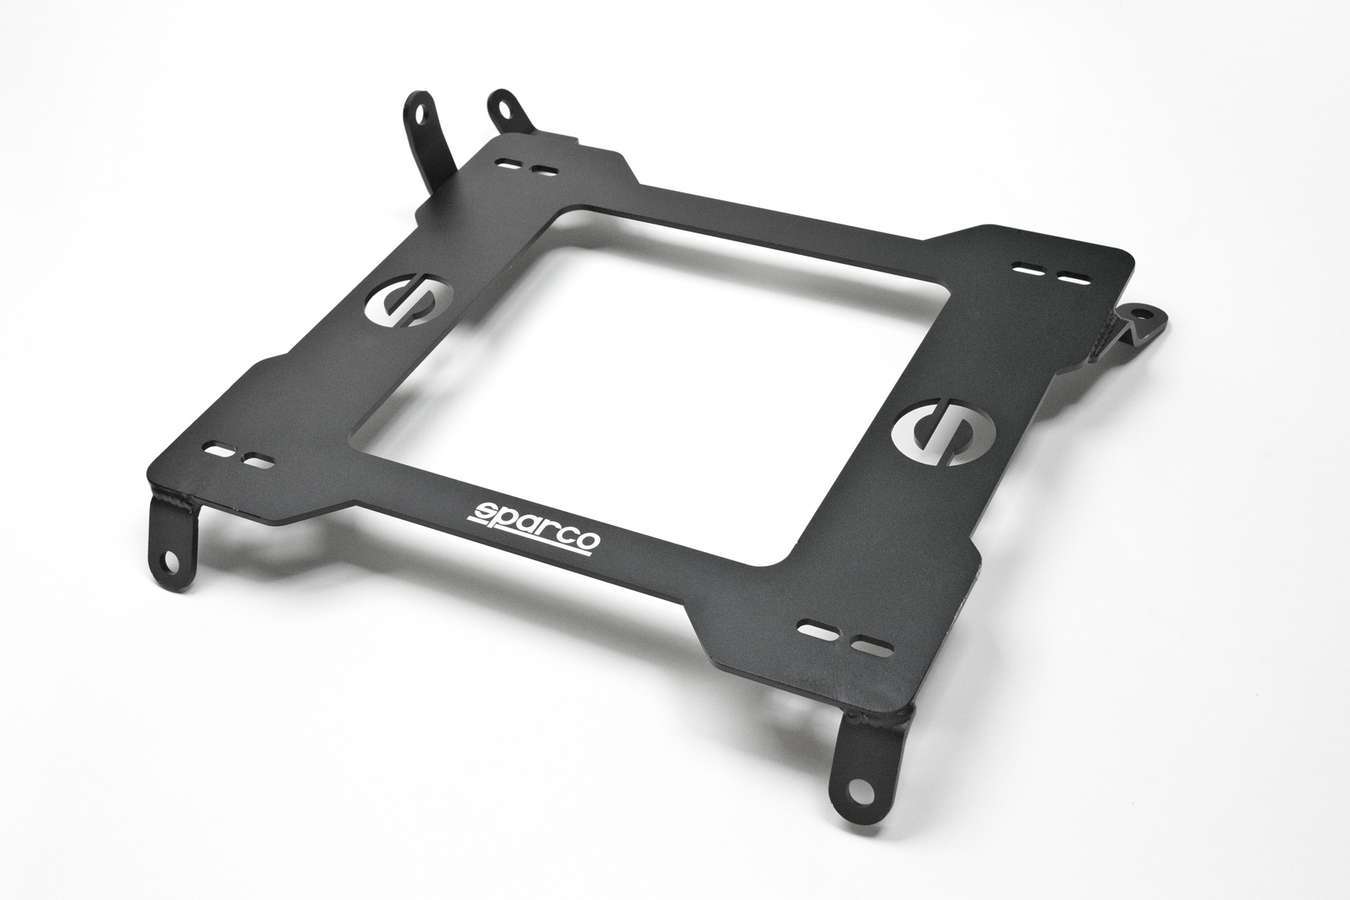 Sparco 600SB039L - Seat Adapter Bracket, 600 Series, Sparco to Driver Side, Steel, Black Powder Coat, Ford Mustang 2005-14, Each